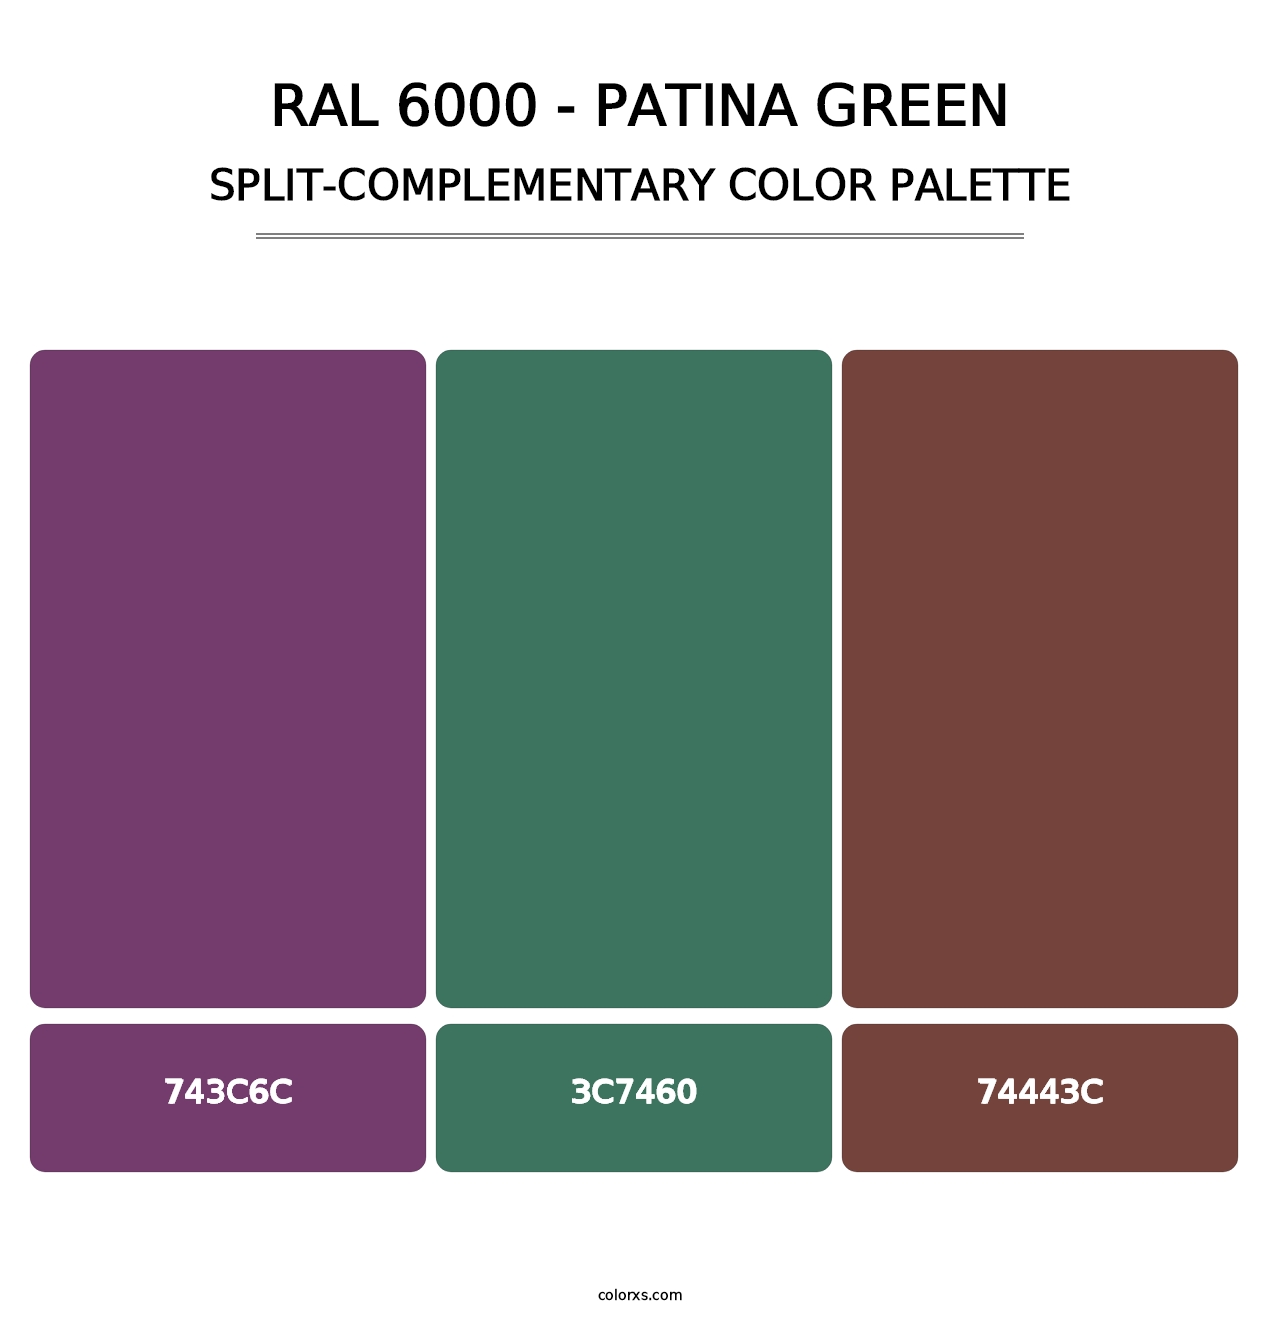 RAL 6000 - Patina Green - Split-Complementary Color Palette